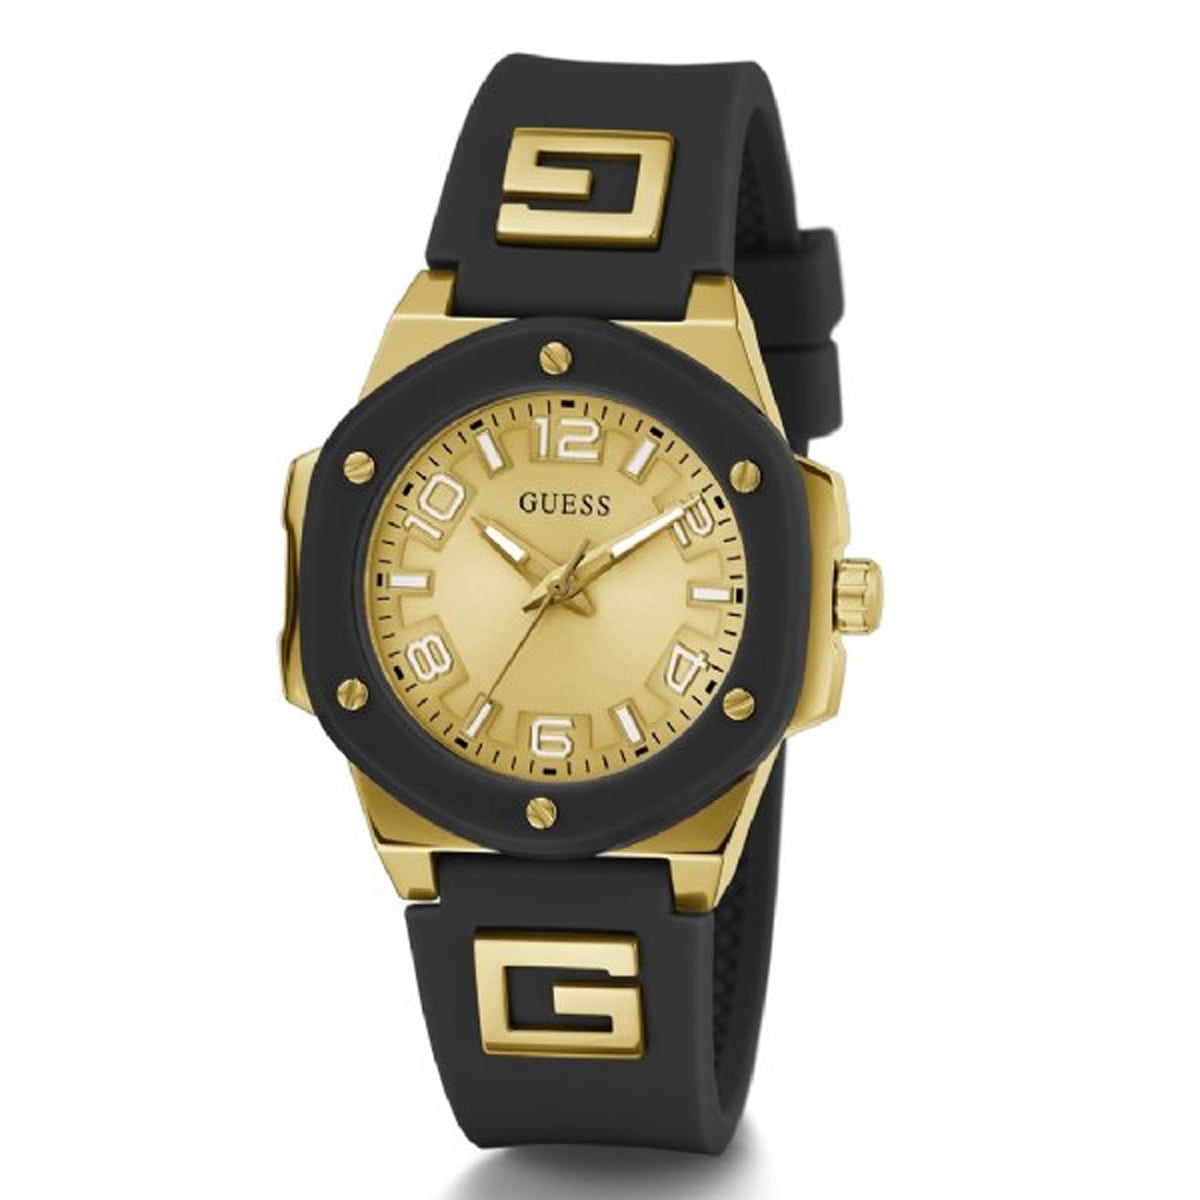 MONTRE GUESS G HYPE FEMME SILICONE